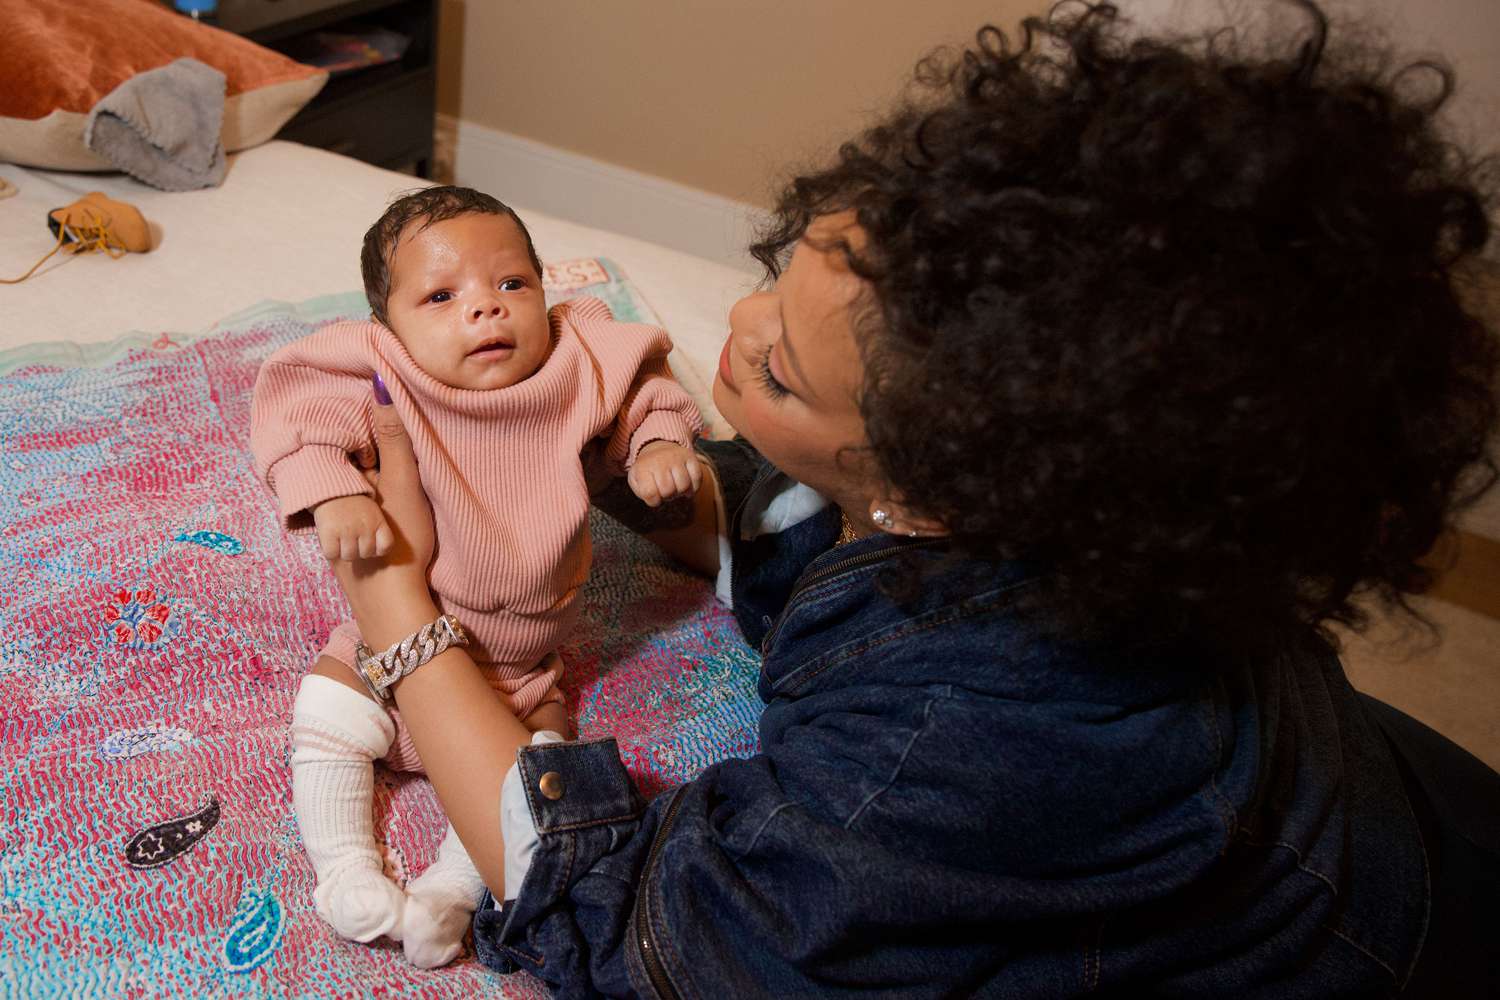 See All the Photos of Rihanna and A$AP Rocky's New Baby, Riot Rose